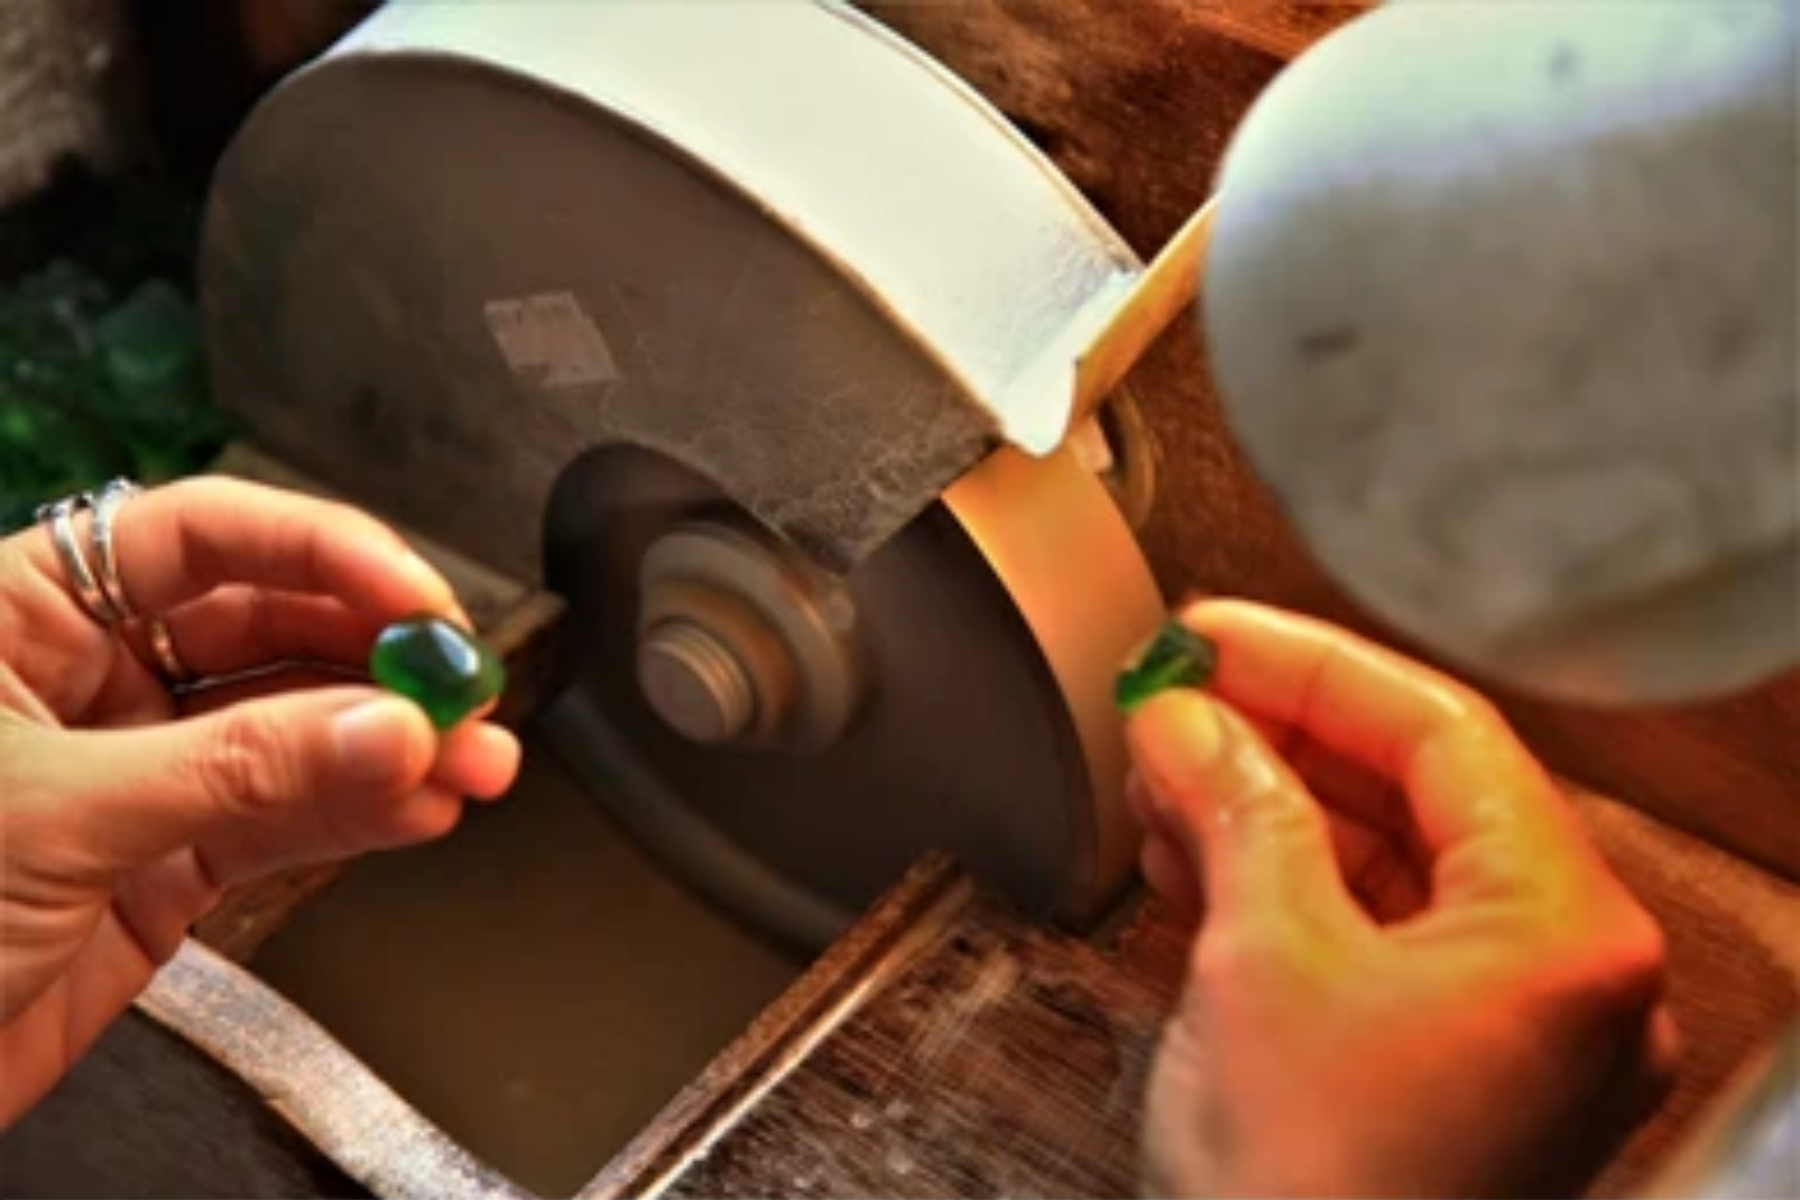 A green stone is directly put into a cutting machine while a well-polished green stone is held in the other hand as a reference